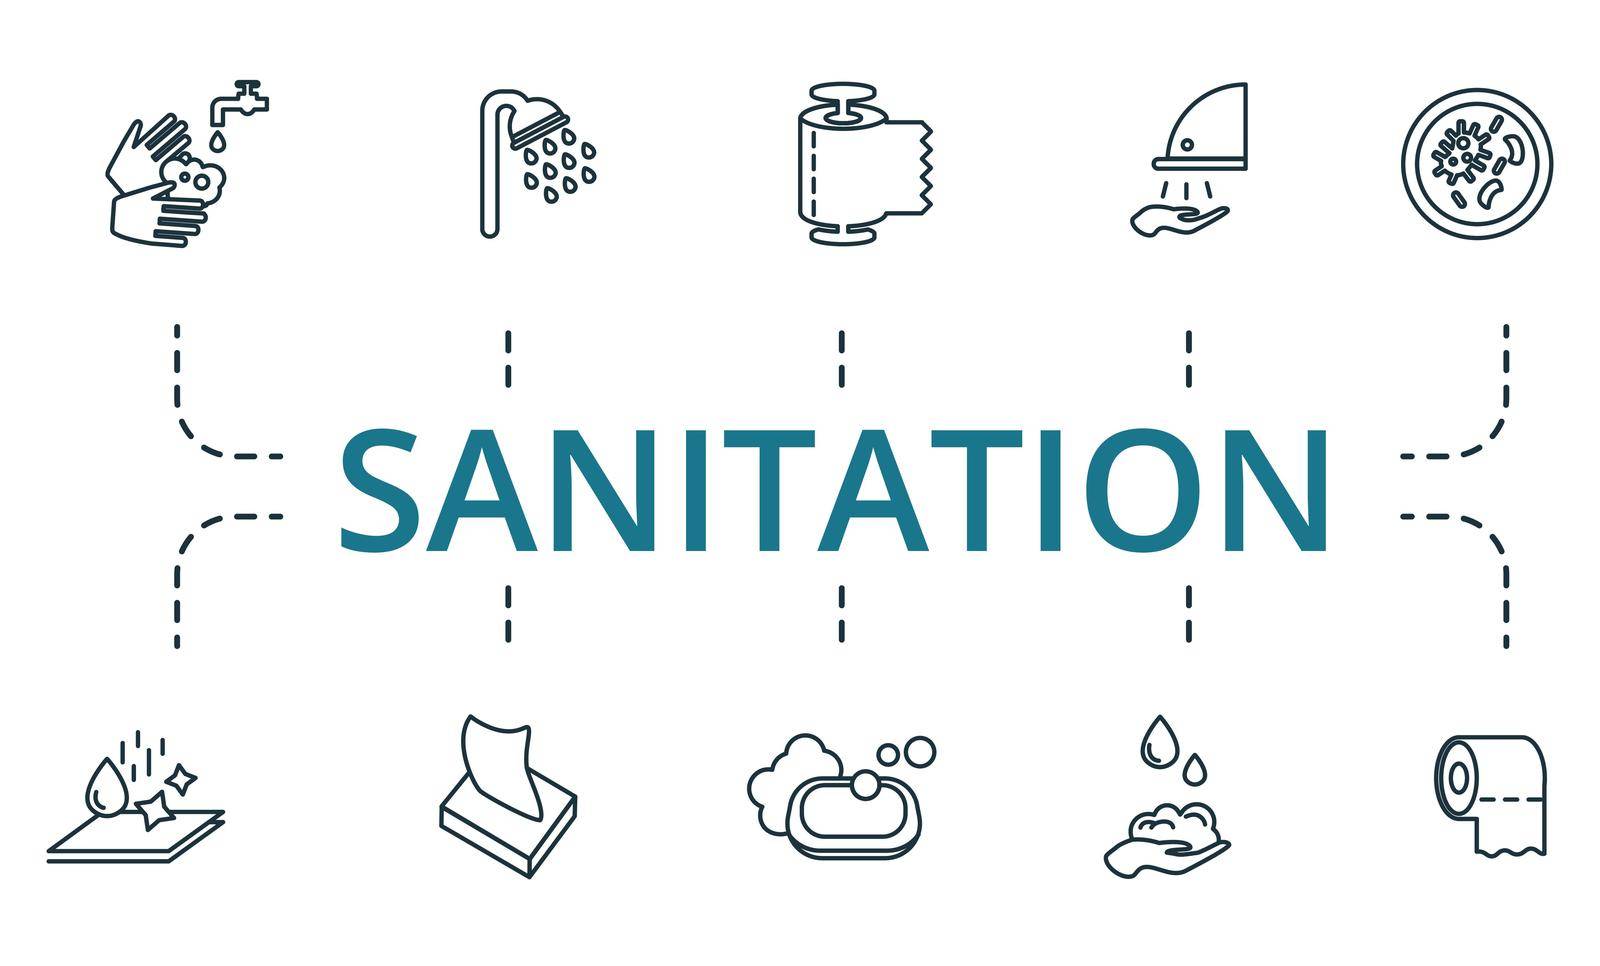 Sanitation icon set. Collection of simple elements such as the shower, hygiene, greenhouse effect, world temperature, oil spill, tsunami, nuclear tank and other icons.